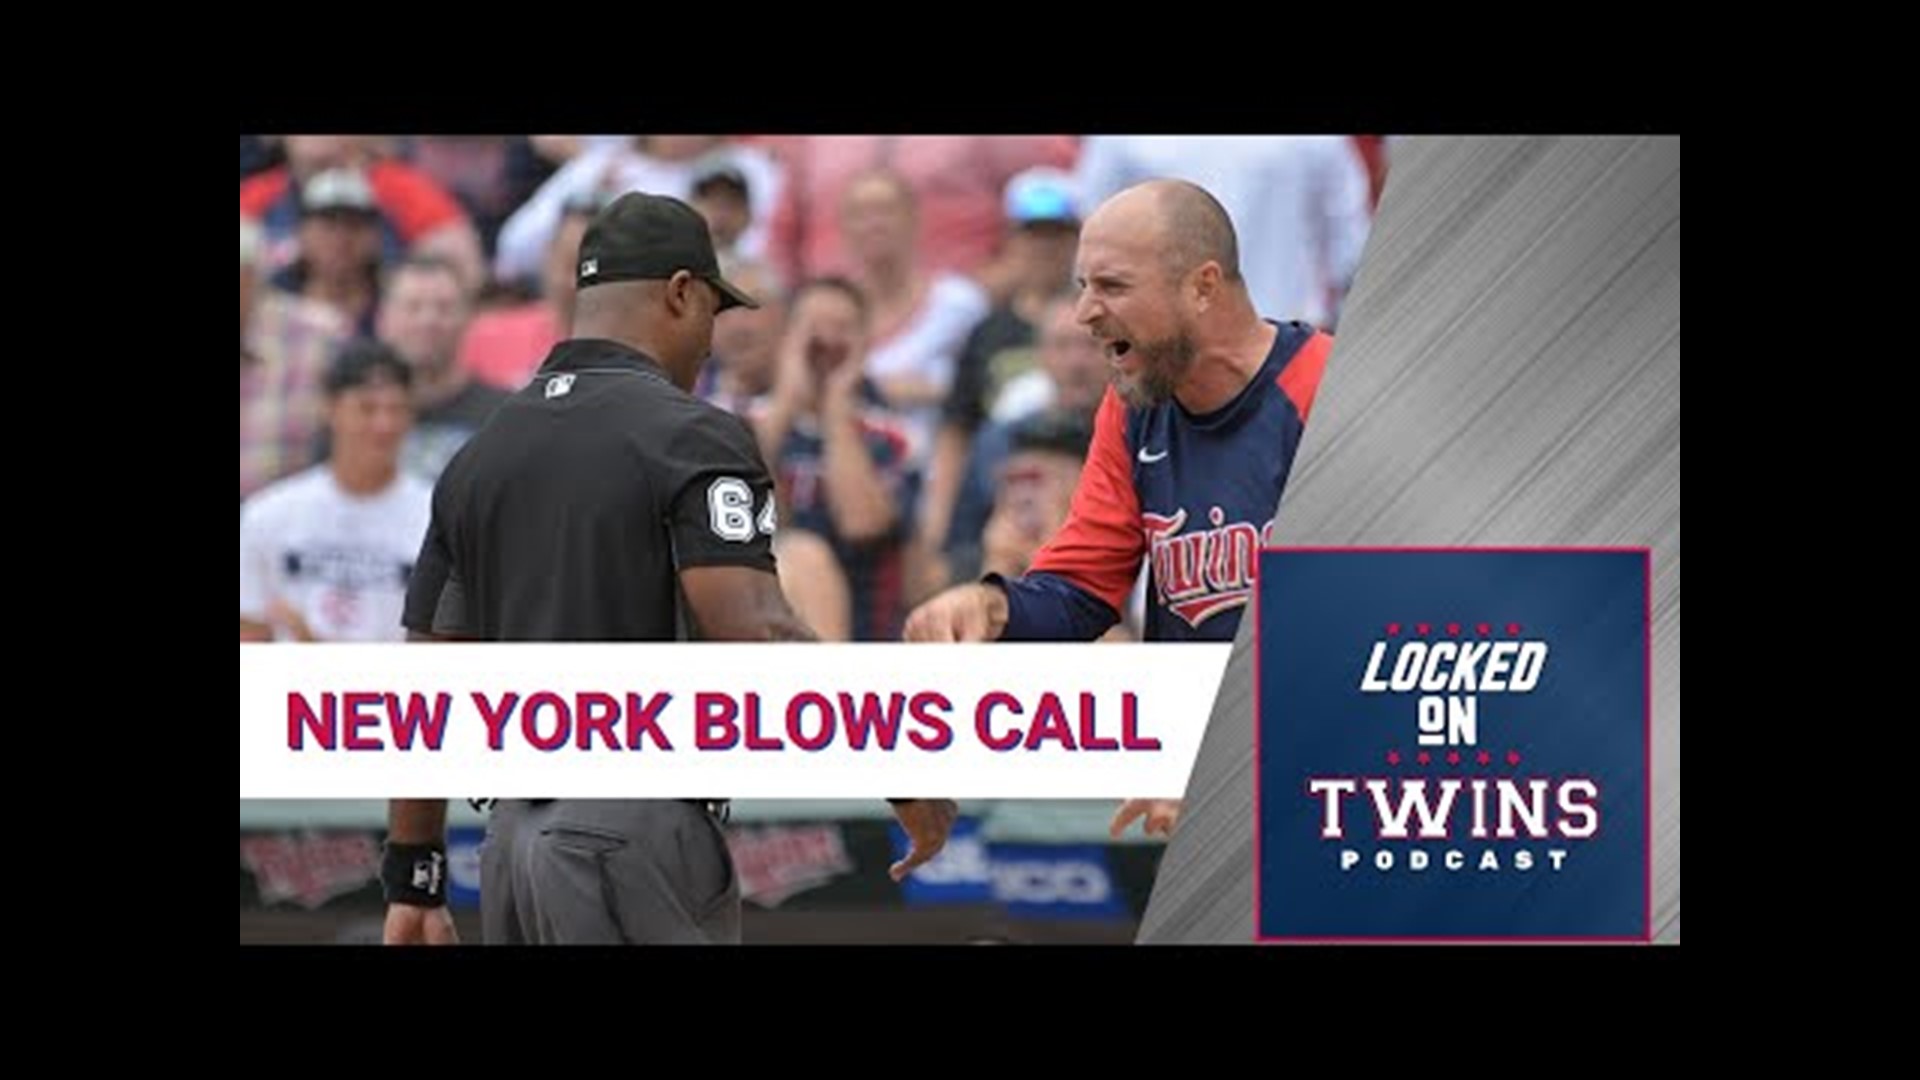 The Minnesota Twins lost a tough game Sunday when the replay review room in New York blew a call, scoring a key run for the Toronto Blue Jays.